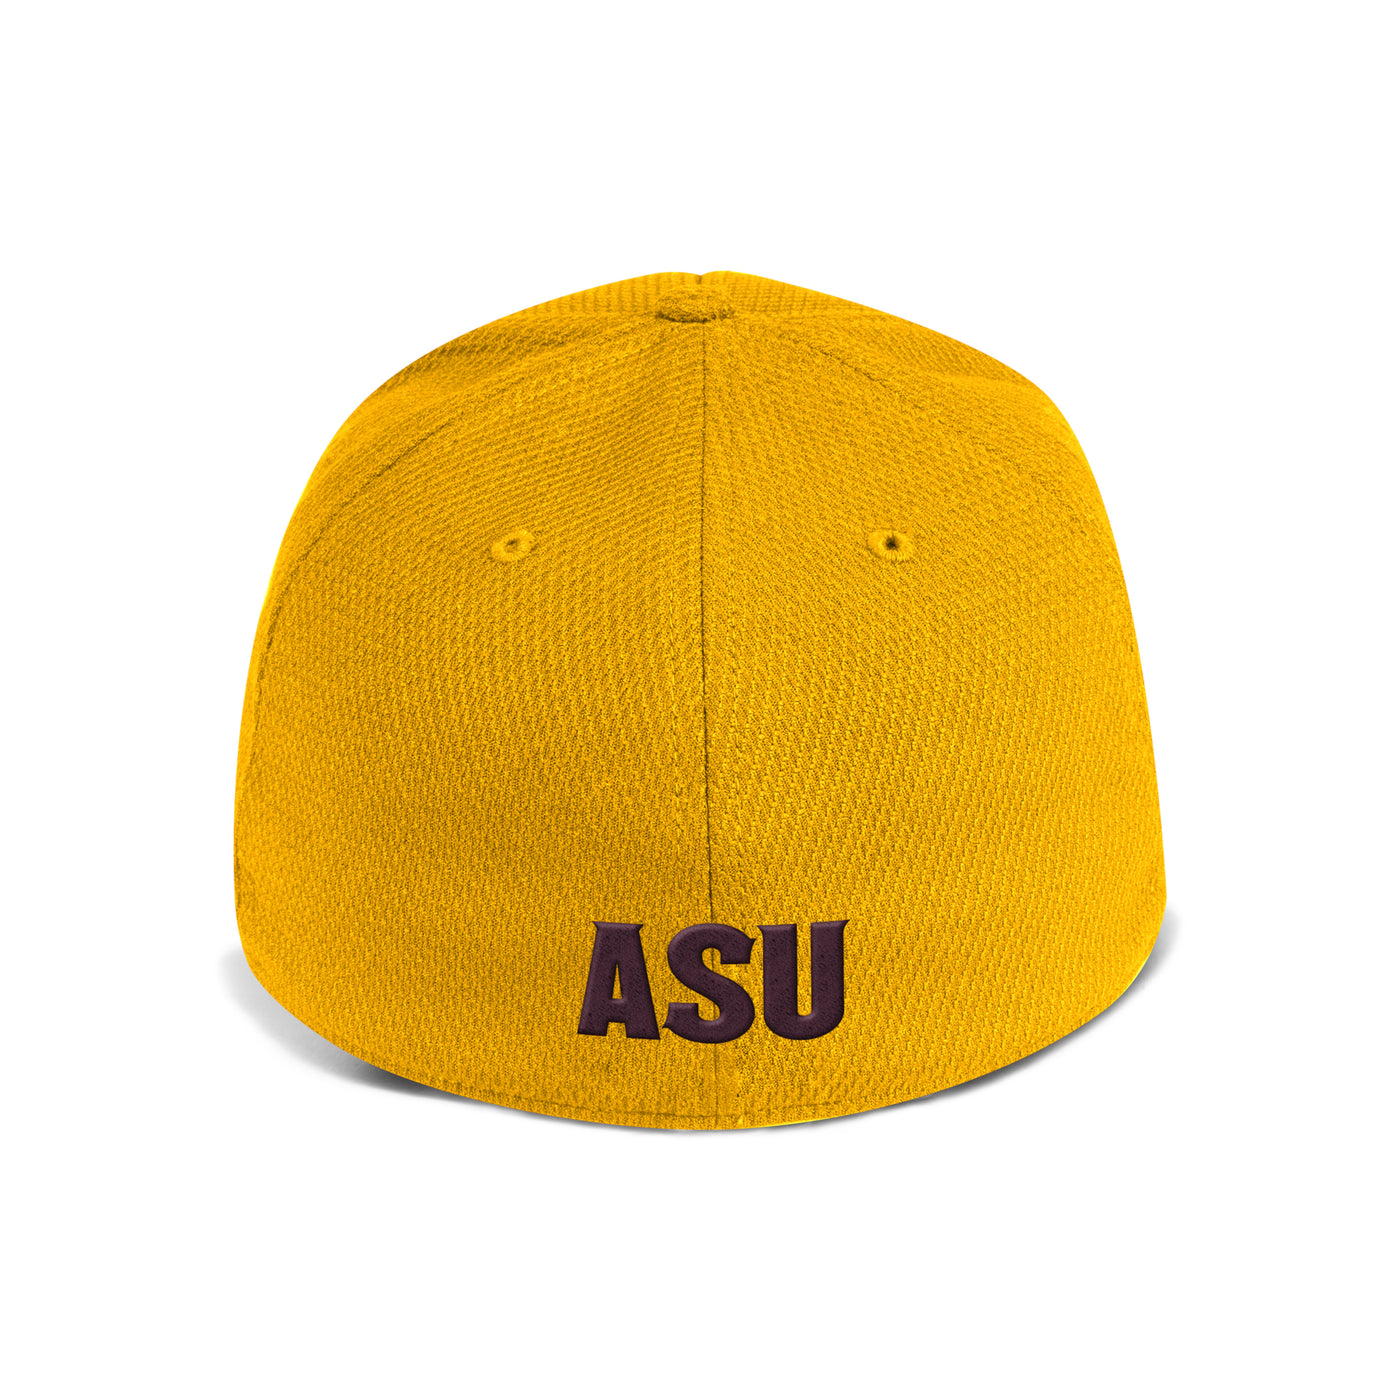 Back of gold hat with maroon 